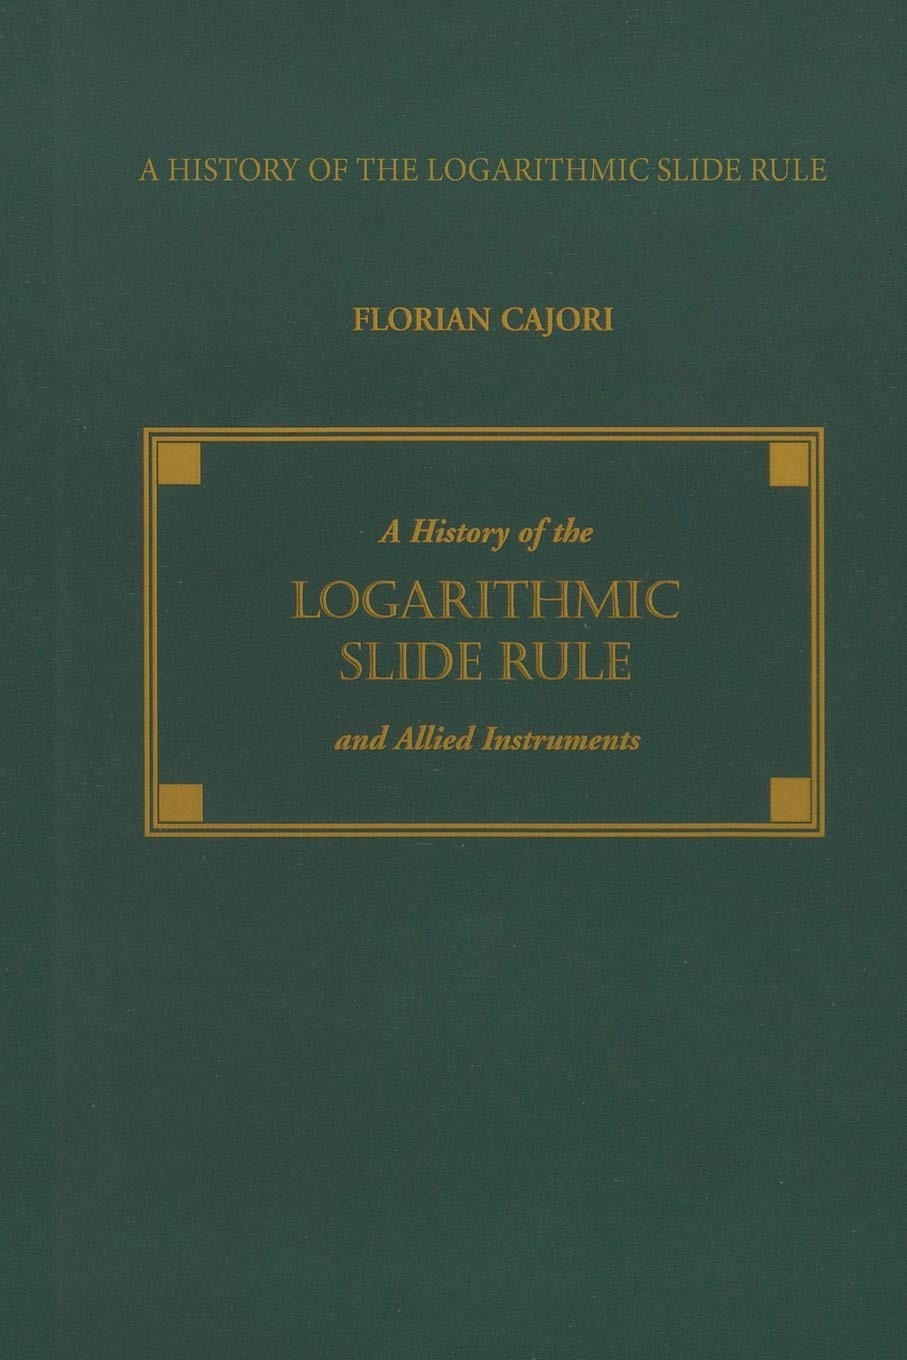 A History of the Logarithmic Slide Rule and Allied Instruments, and on the History of Gunter's Scale and the Slide Rule During the Seventeenth Century